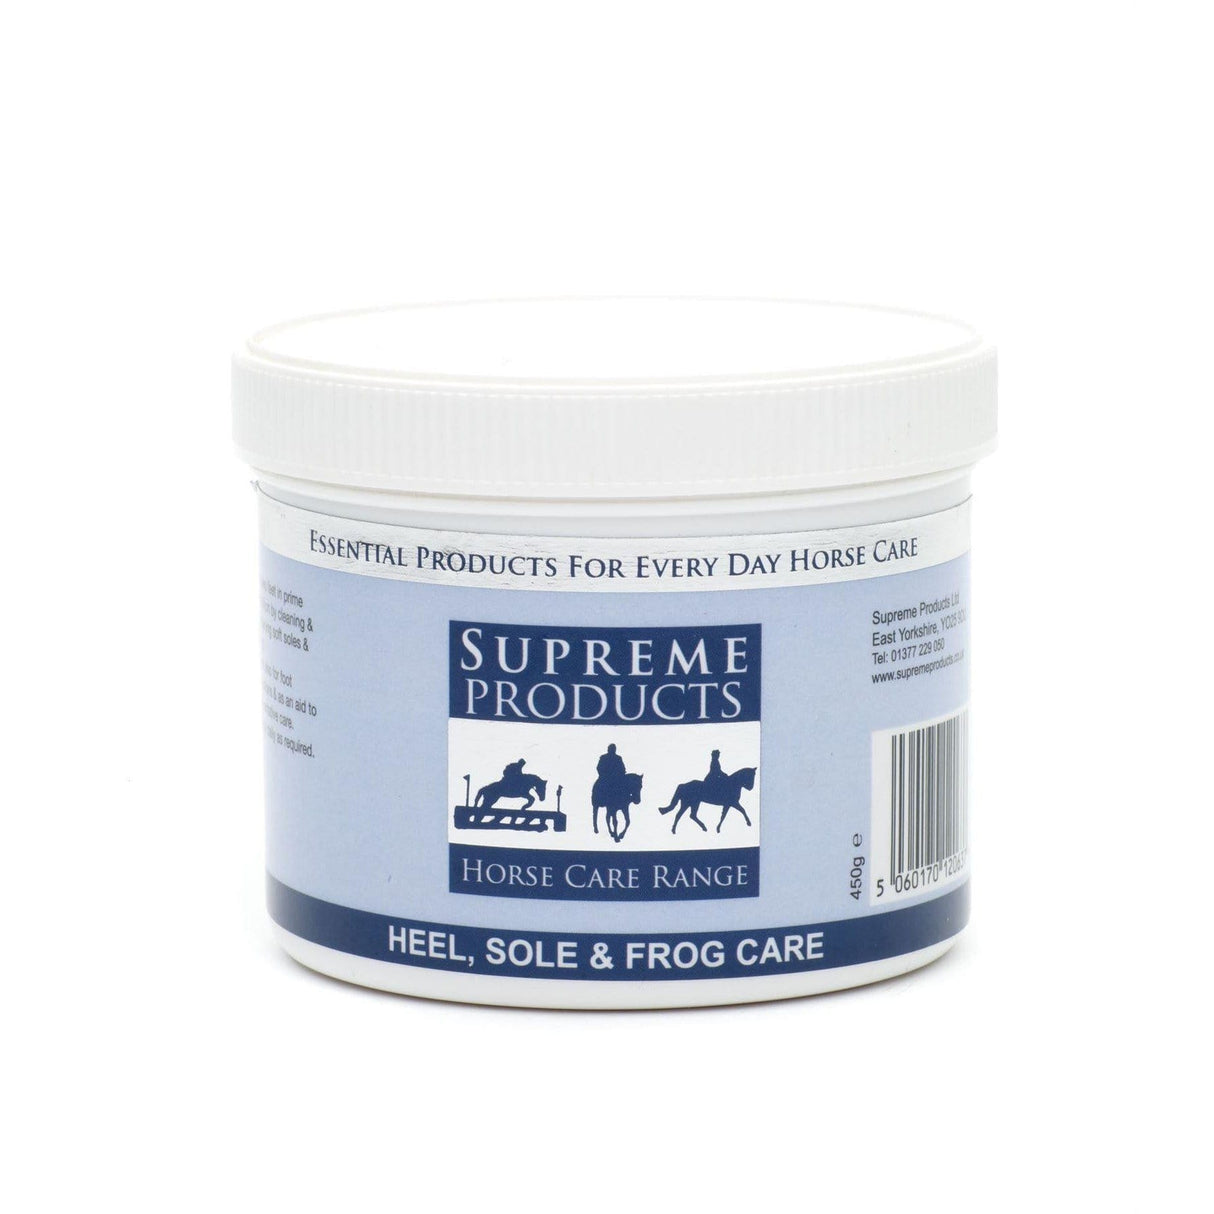 SUPREME PRODUCTS Supreme Horse Care Heel, Sole & Frog Care SUP0455